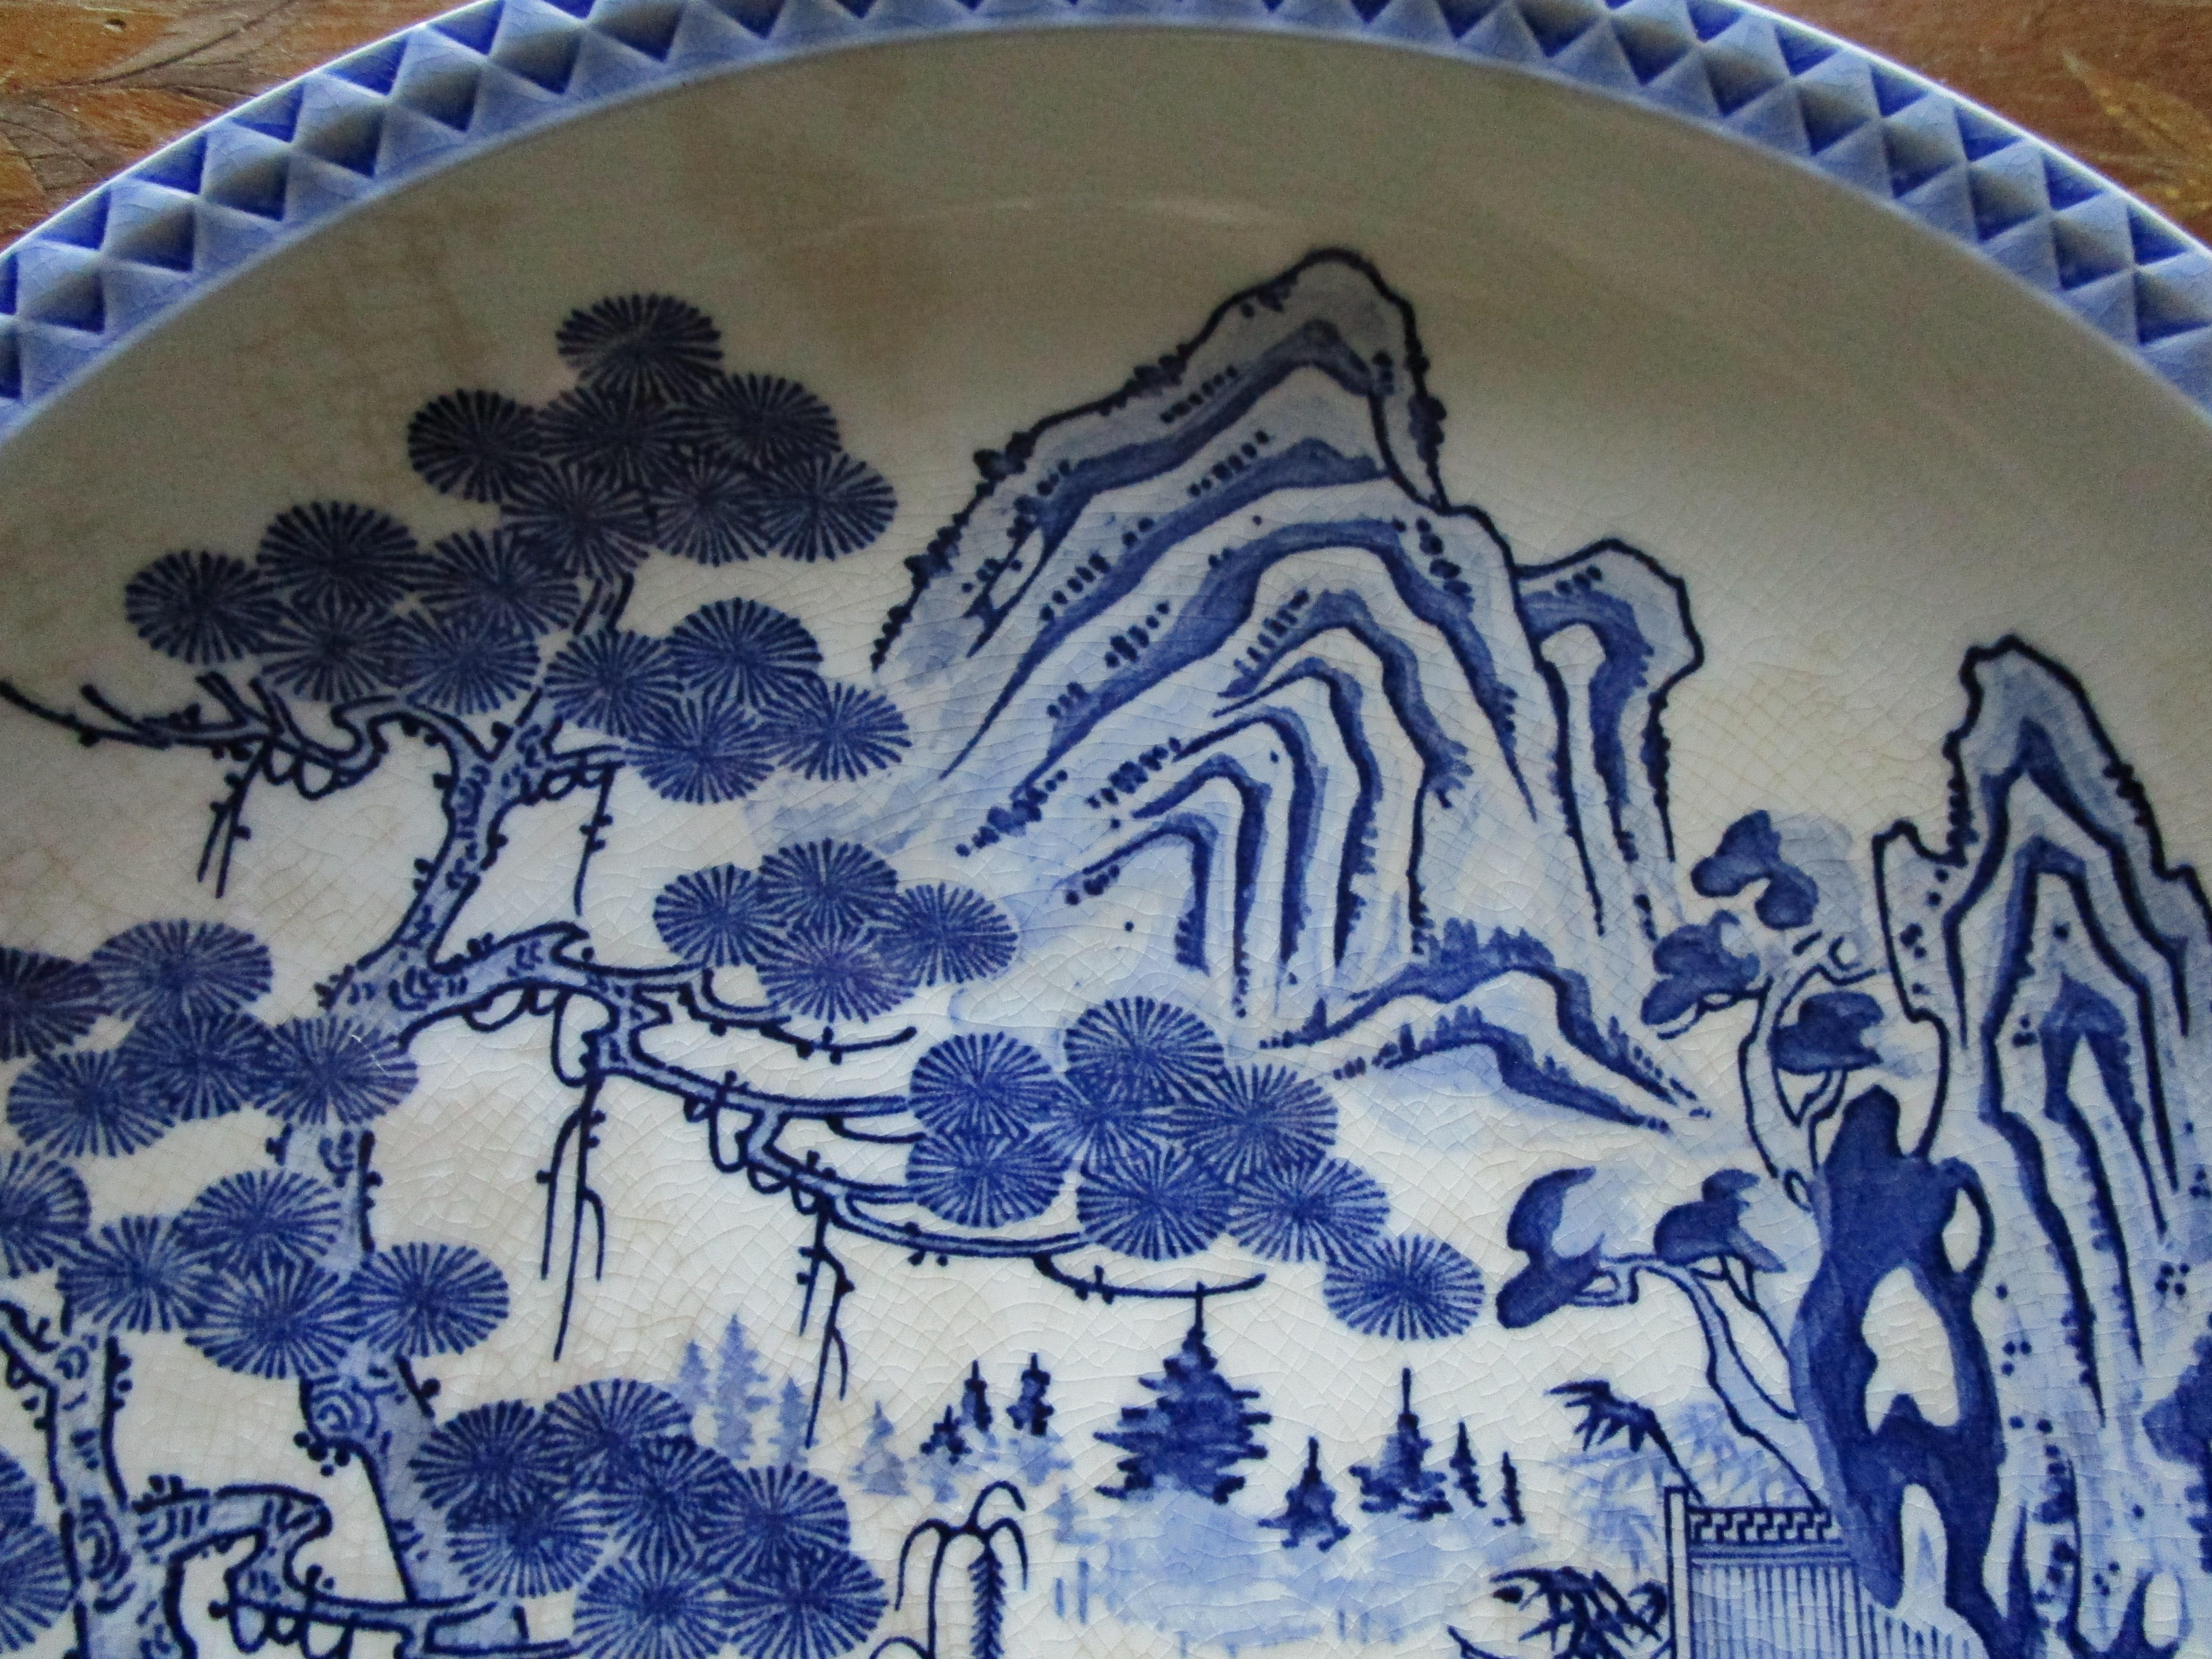 Blue and White Porcelain Chinese Export Charger with Mountains, Pagoda For Sale 3